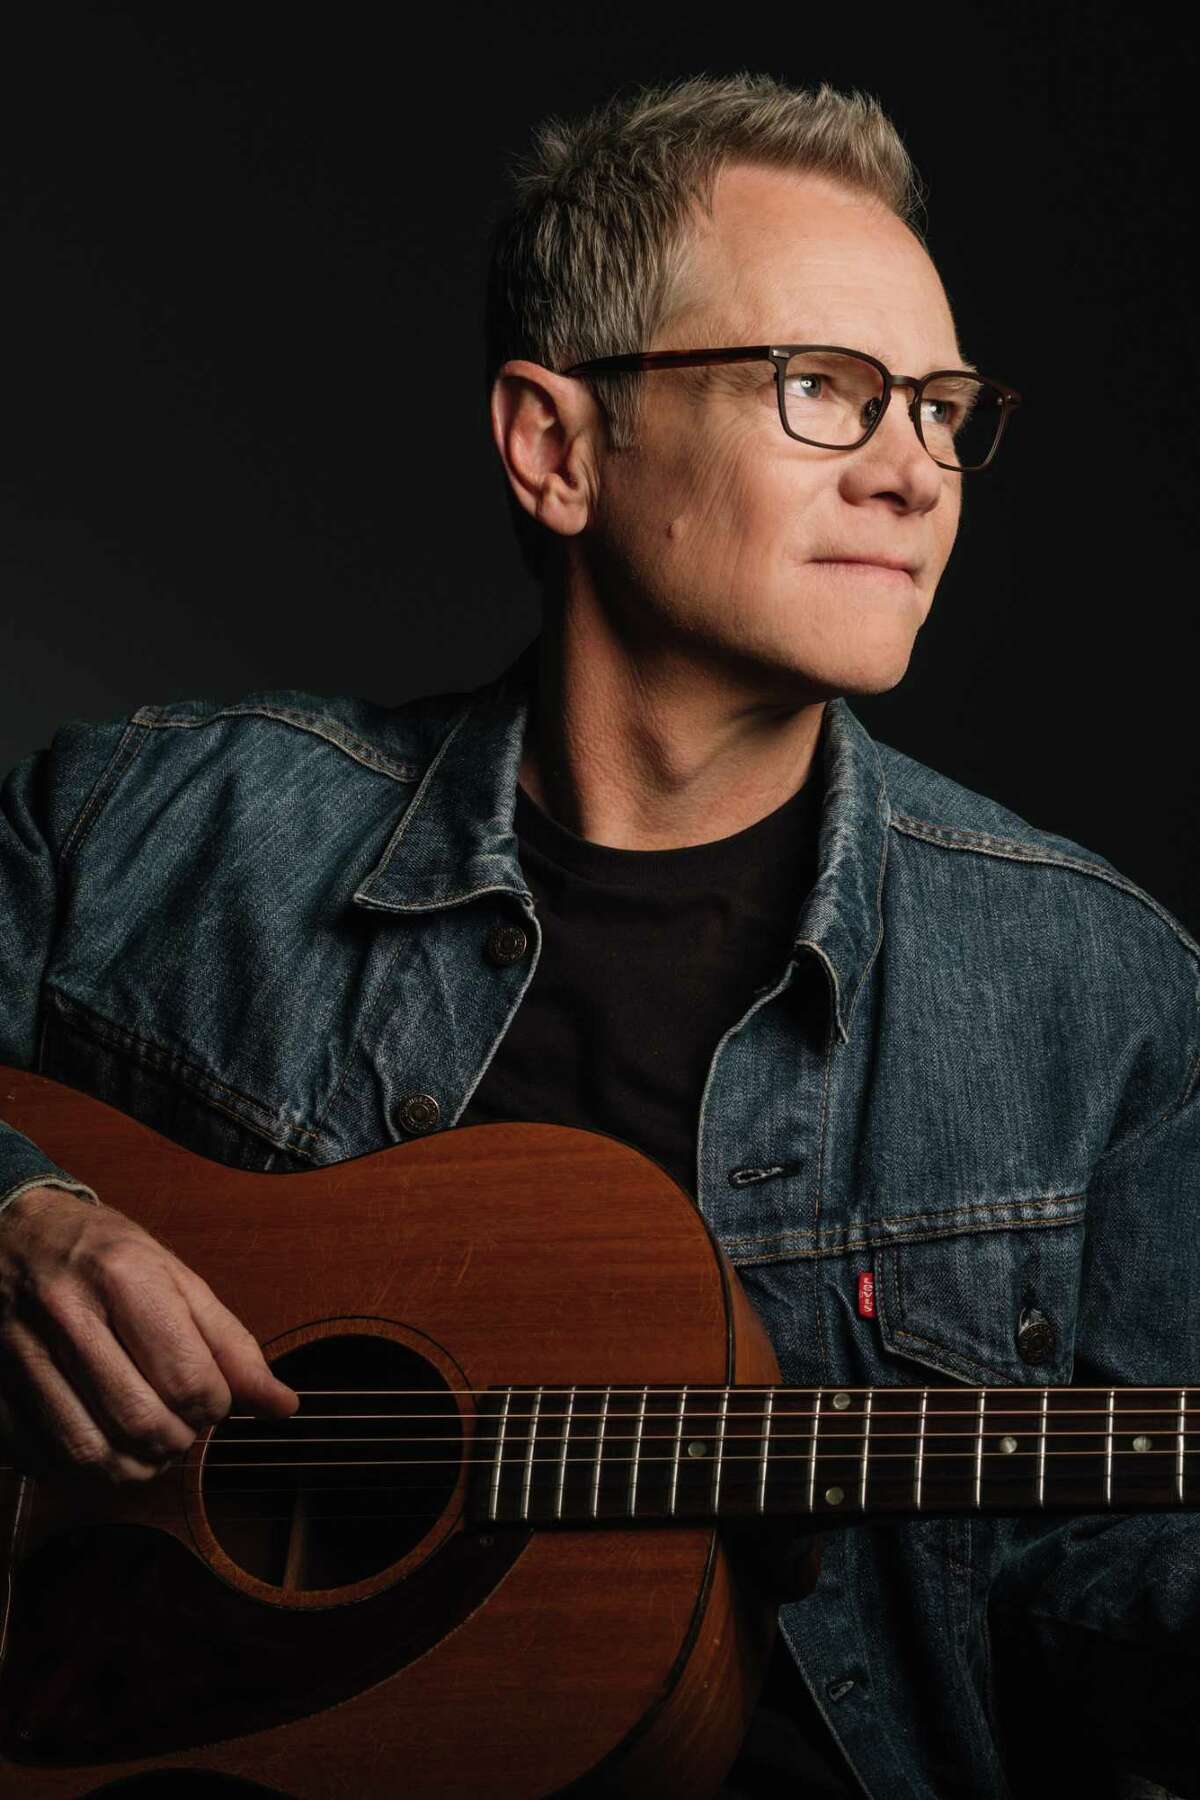 Christian recording artist Steven Curtis Chapman is slated to perform on Sunday, March 10, at Sugar Land Baptist Church. The concert will feature just Chapman and his guitar and look back at his long career of songs and stories.